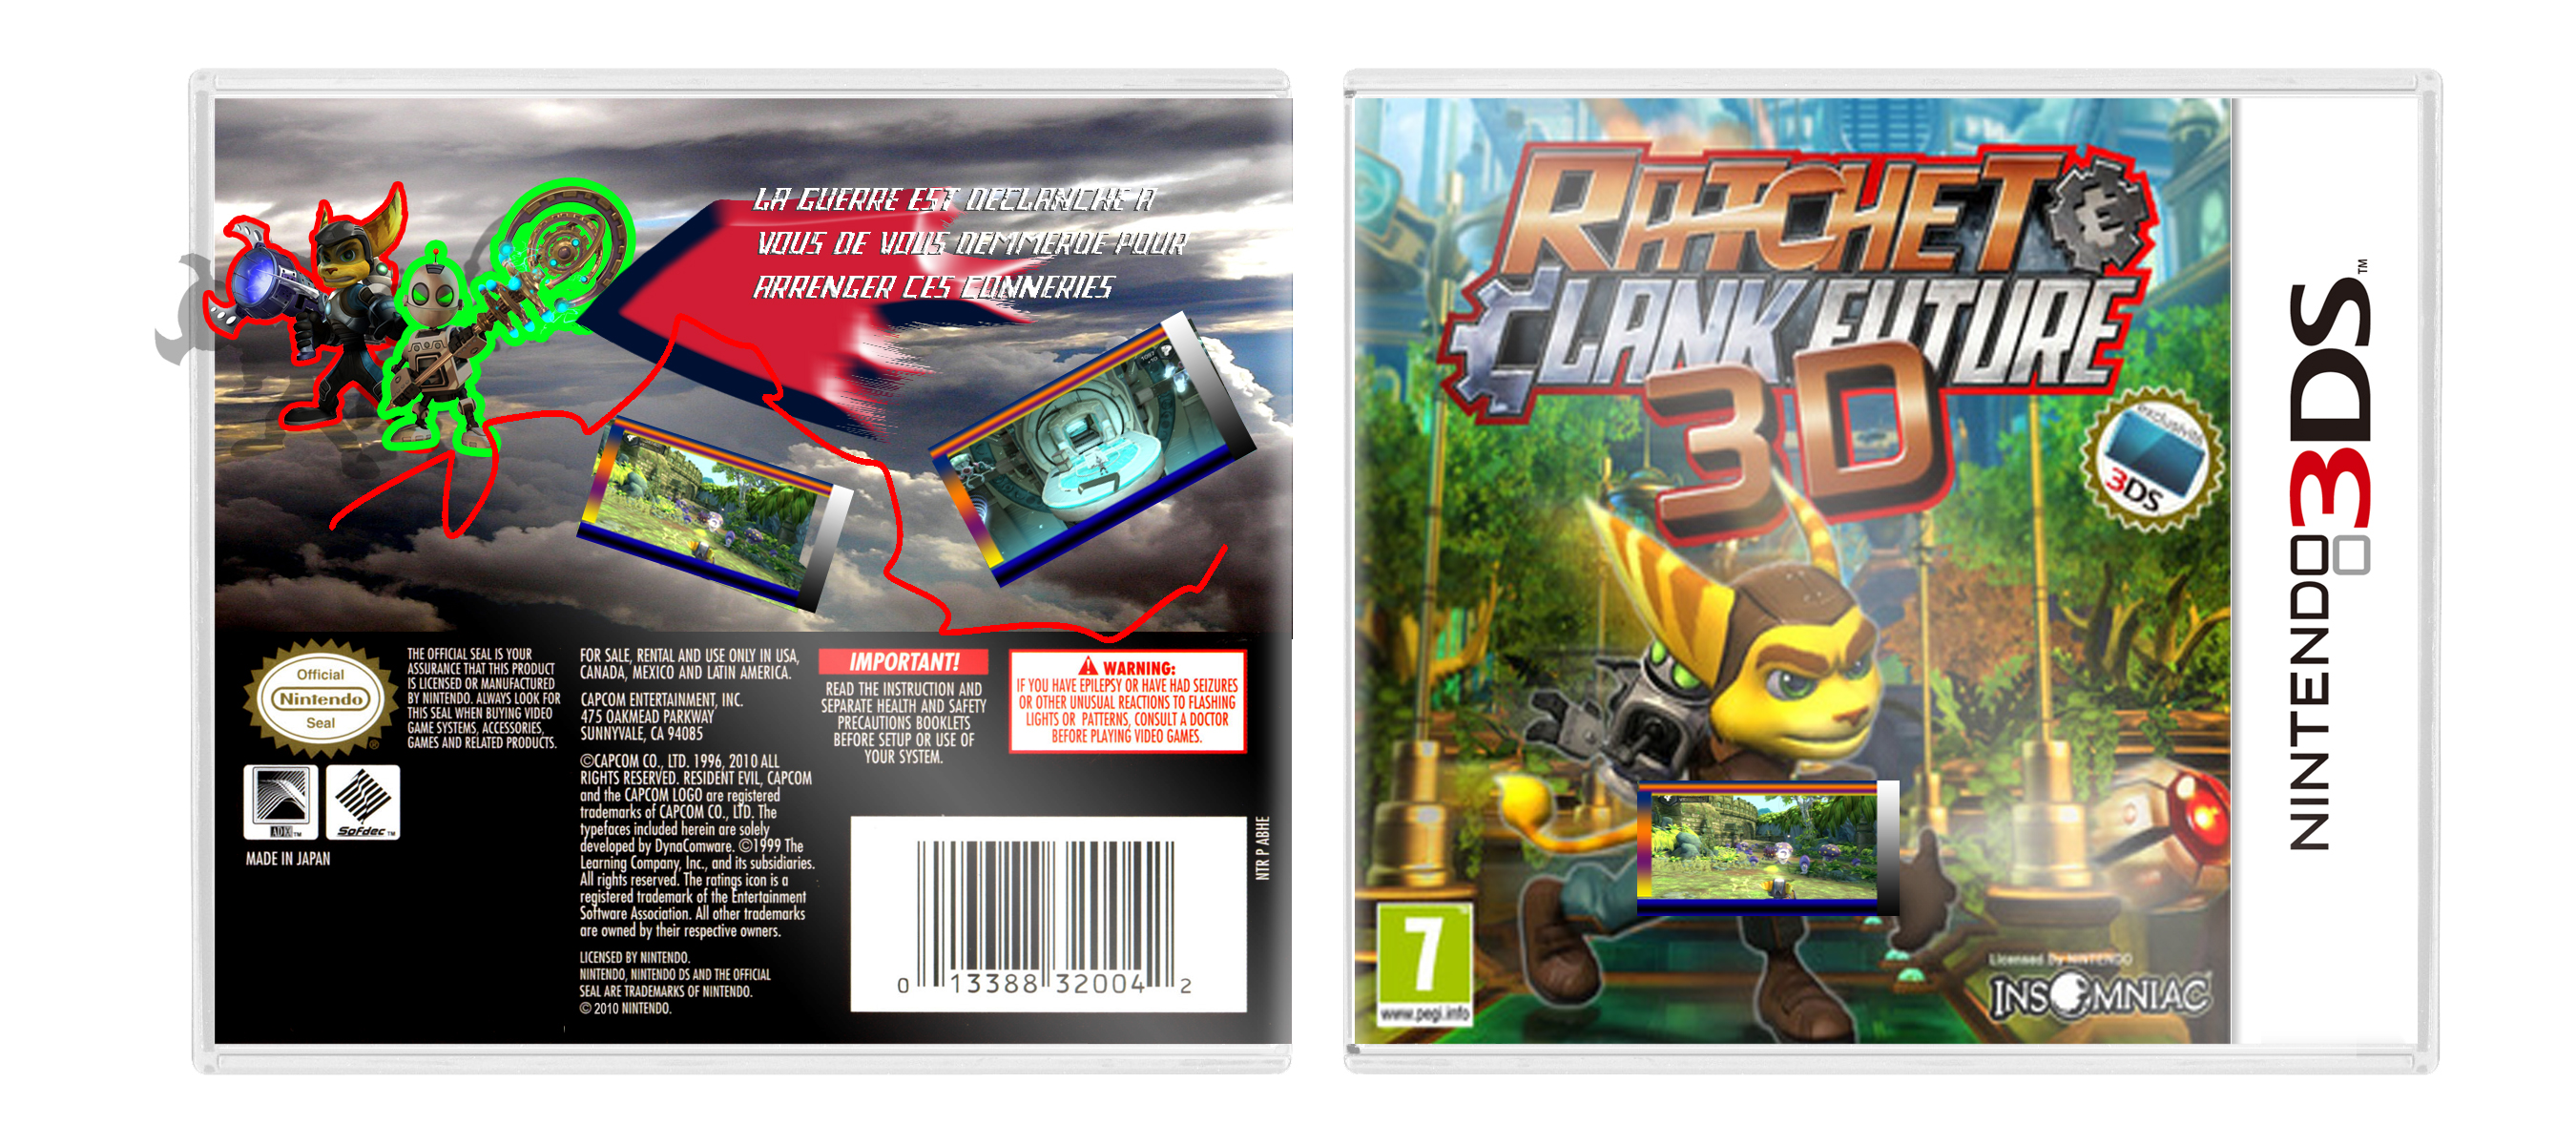 Ratchet and Clank 3D box cover